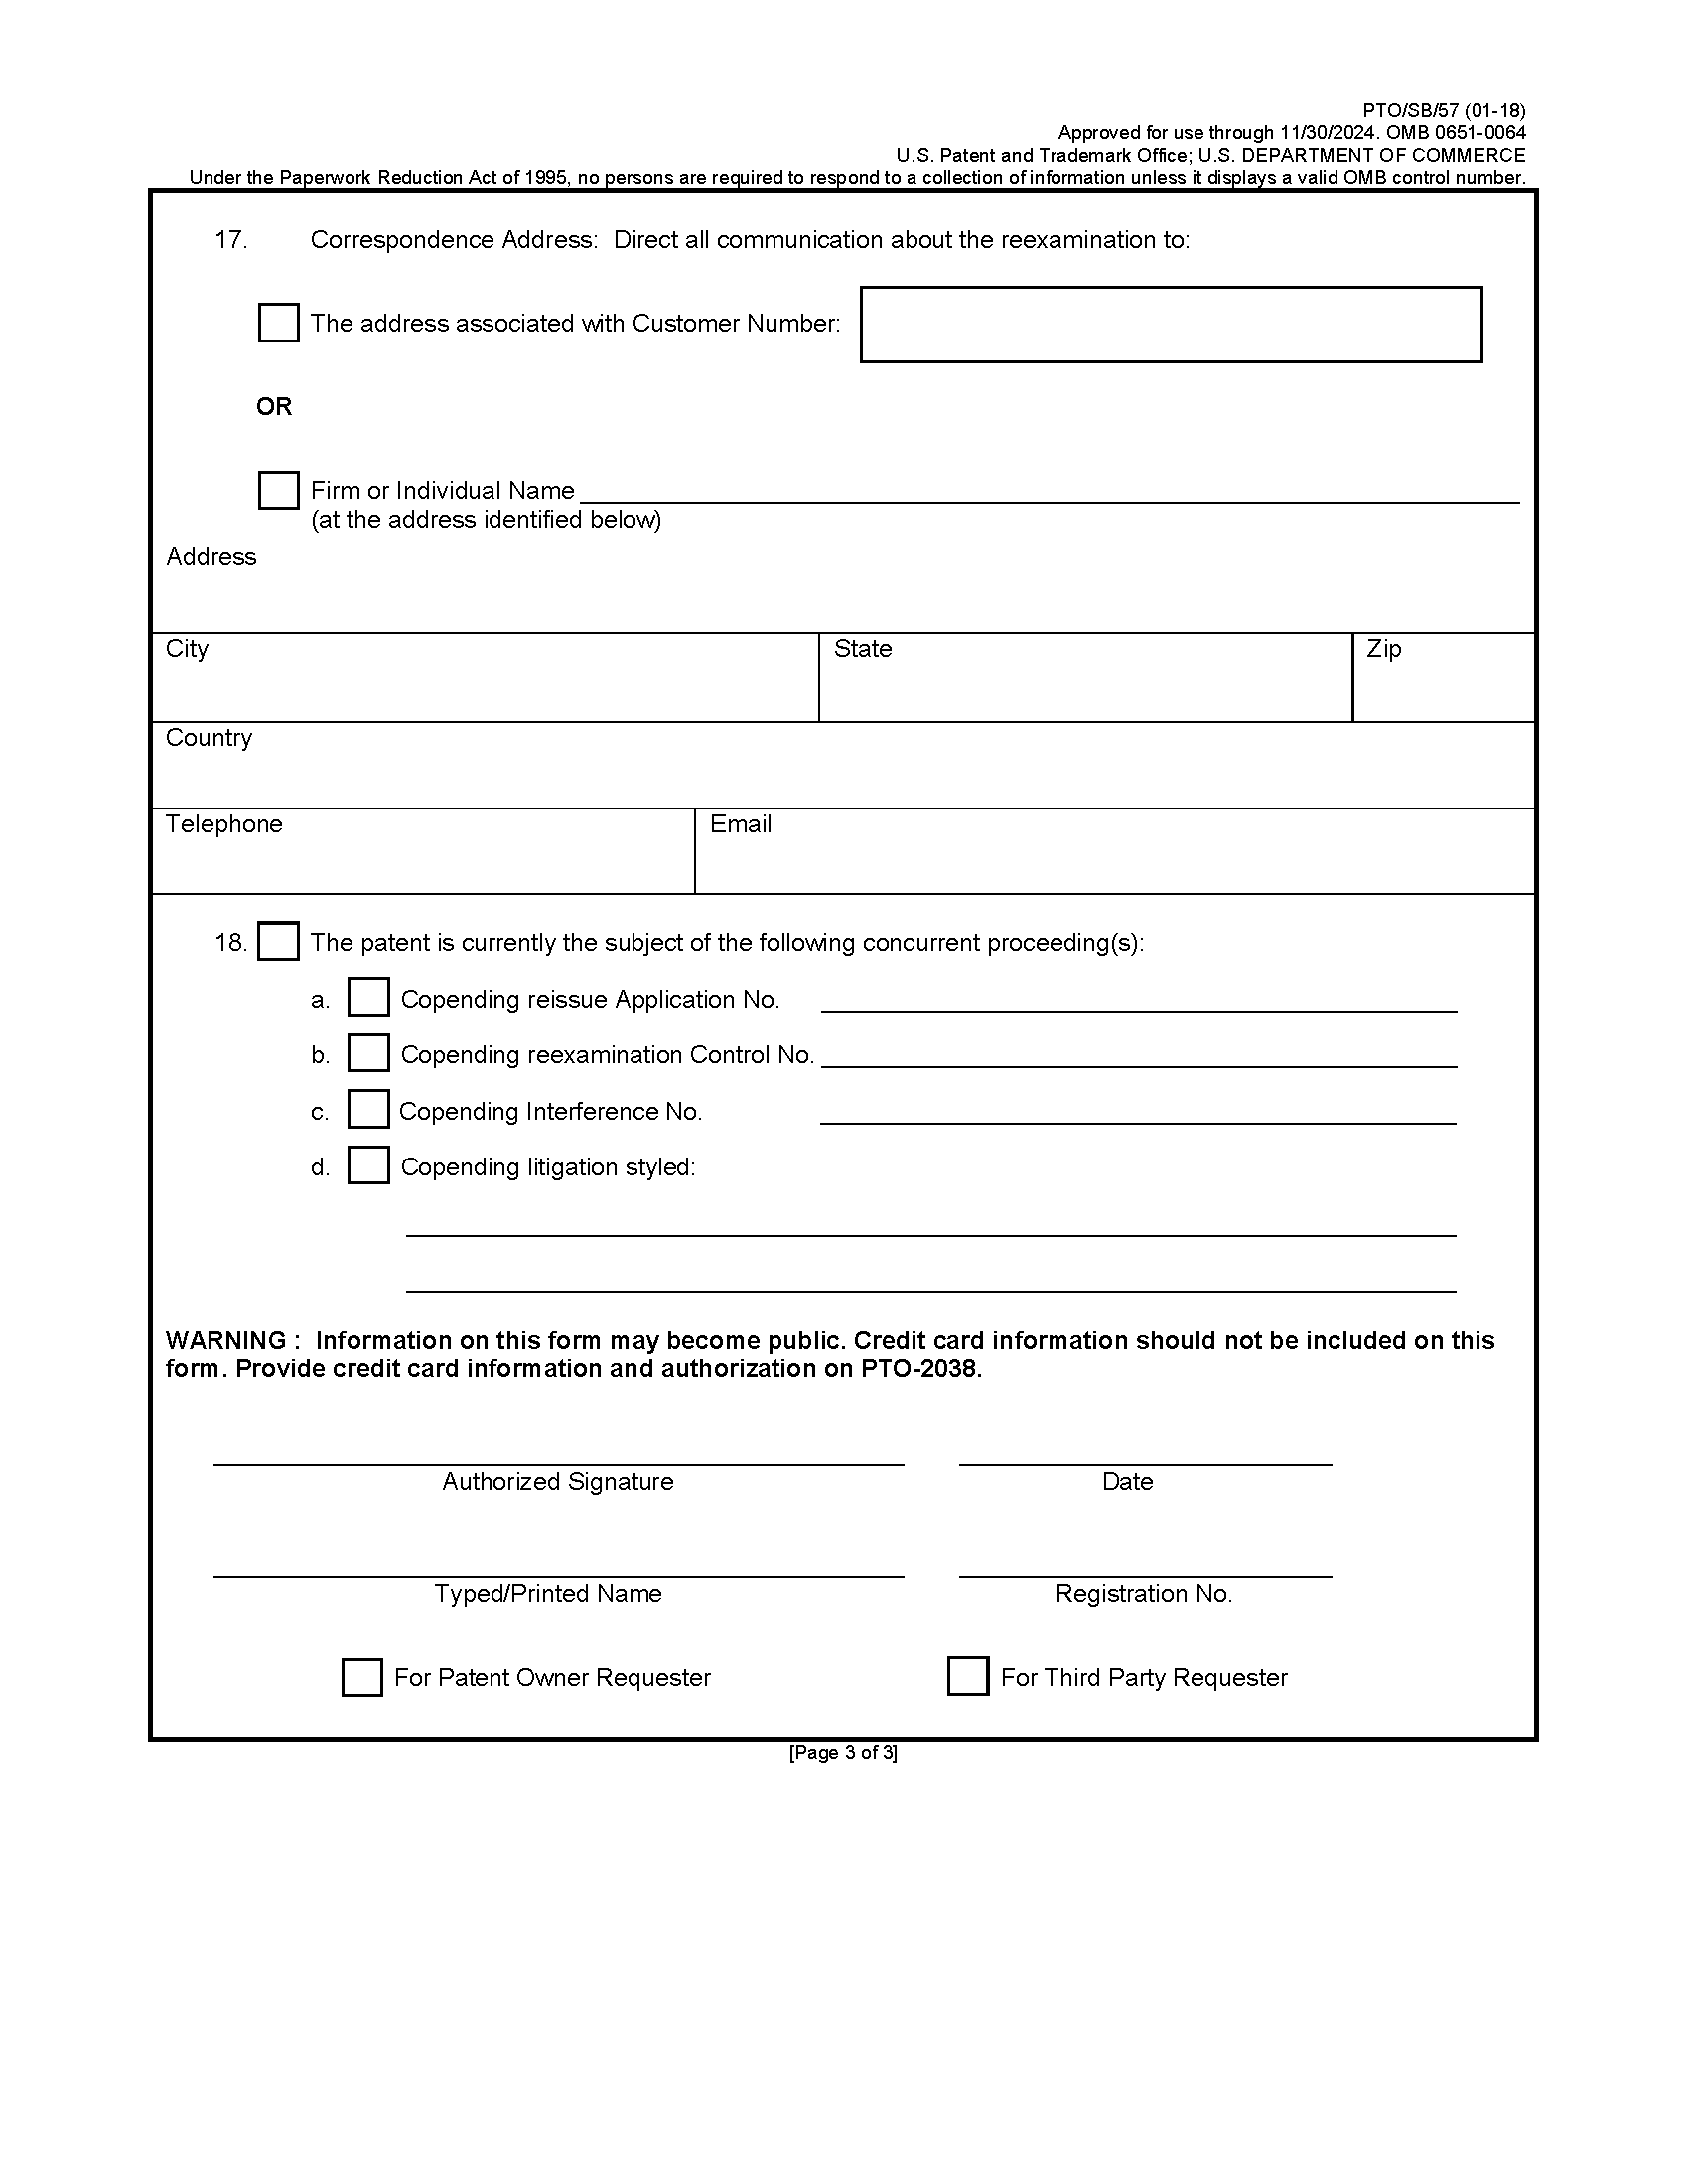 Form PTO/SB/57. Request for Ex Parte Reexamination Transmittal Form [Page 3 of 4]